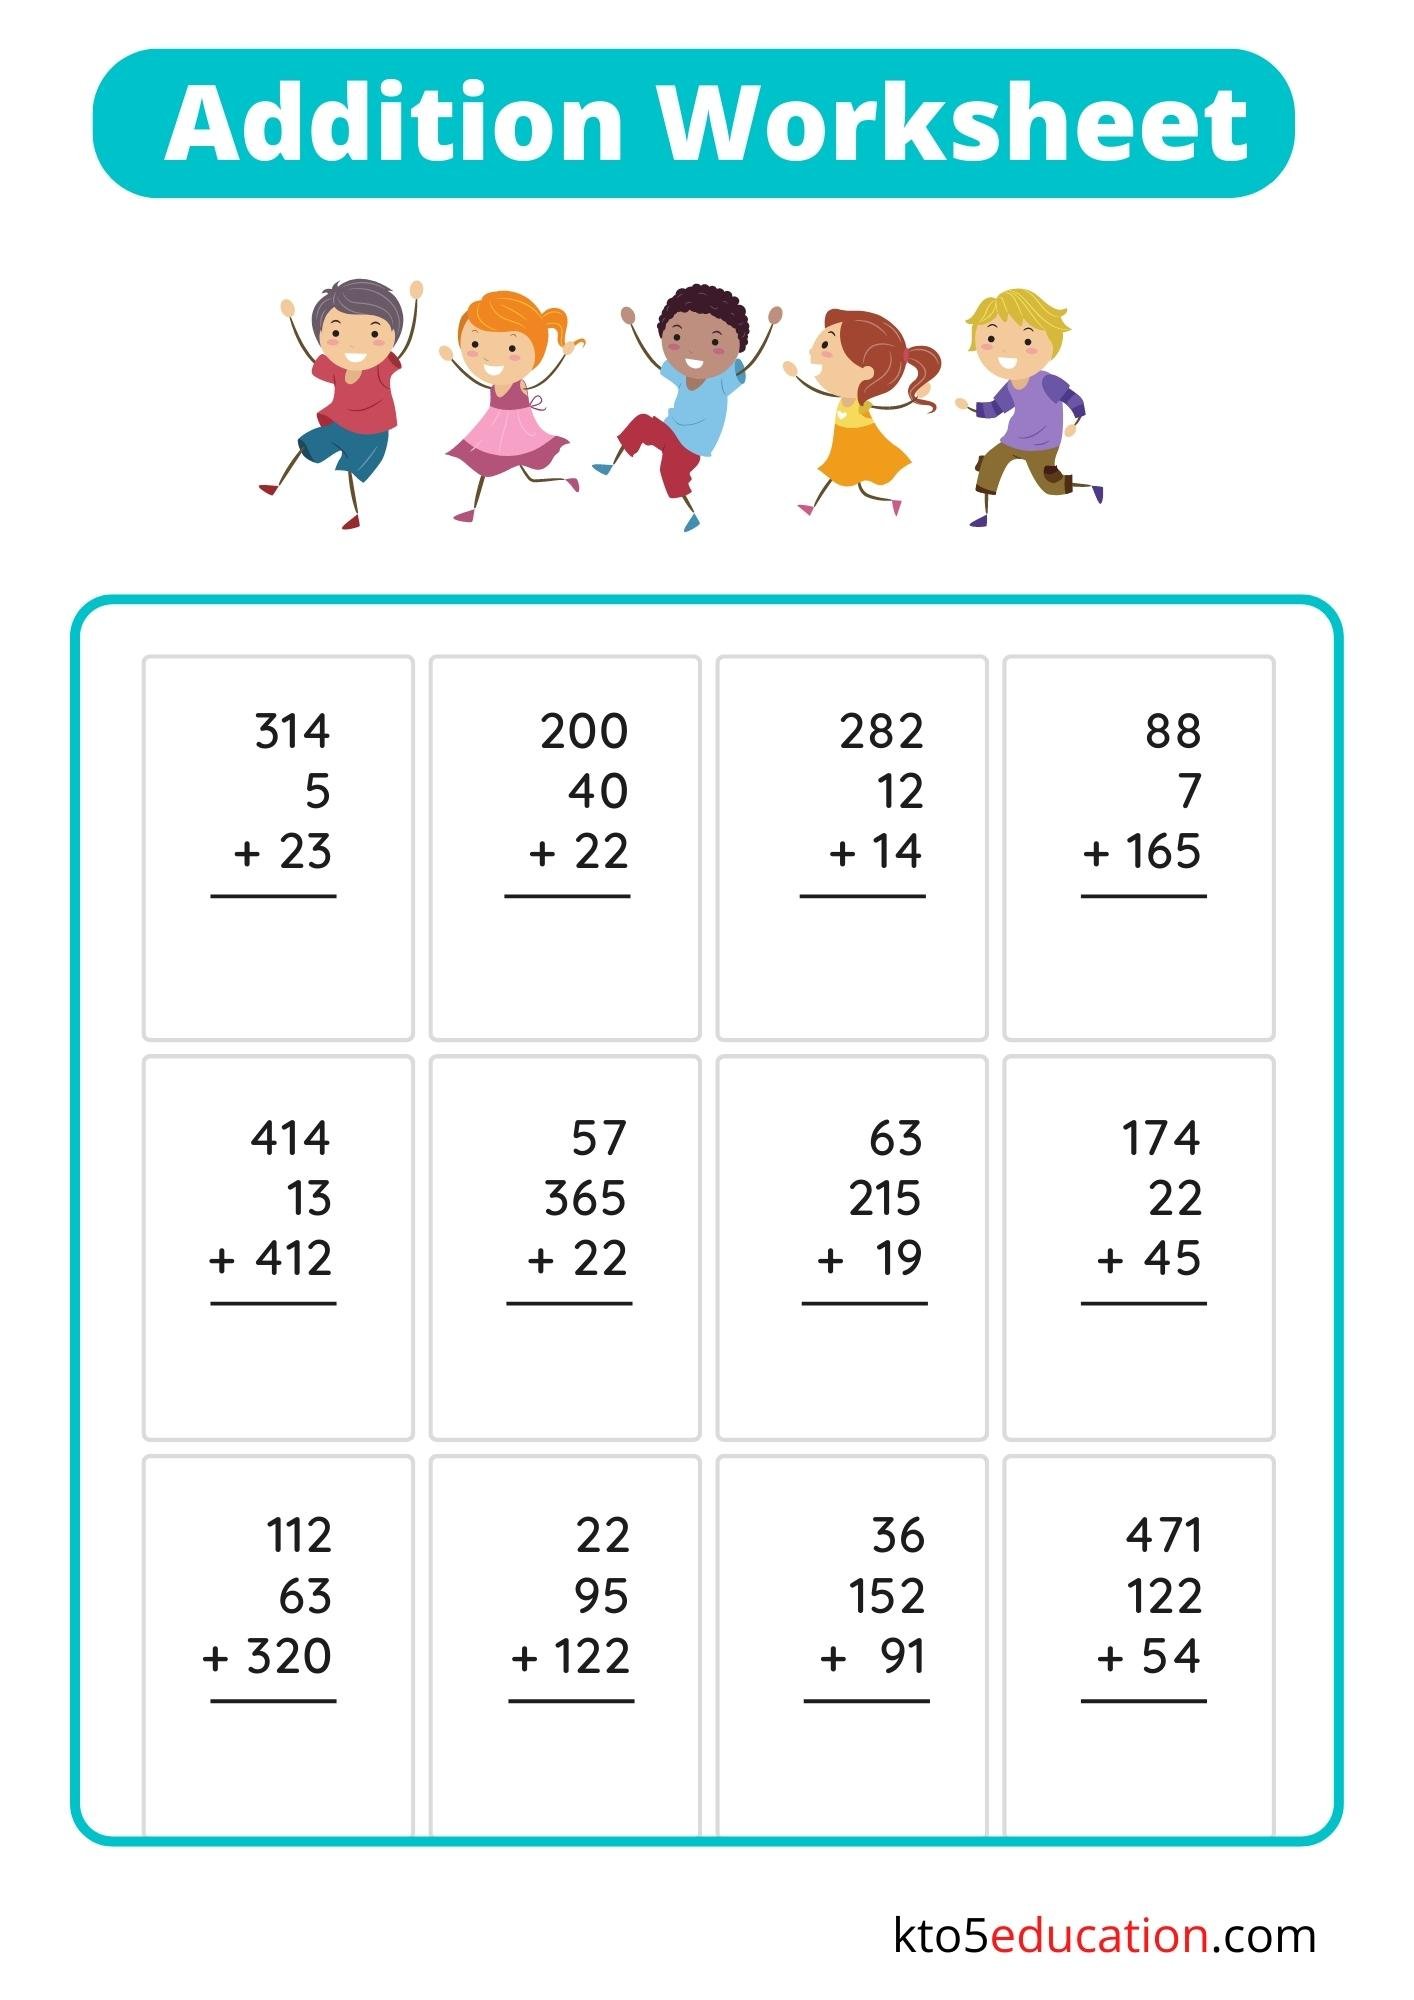 free-addition-fact-practice-worksheet-kto5education